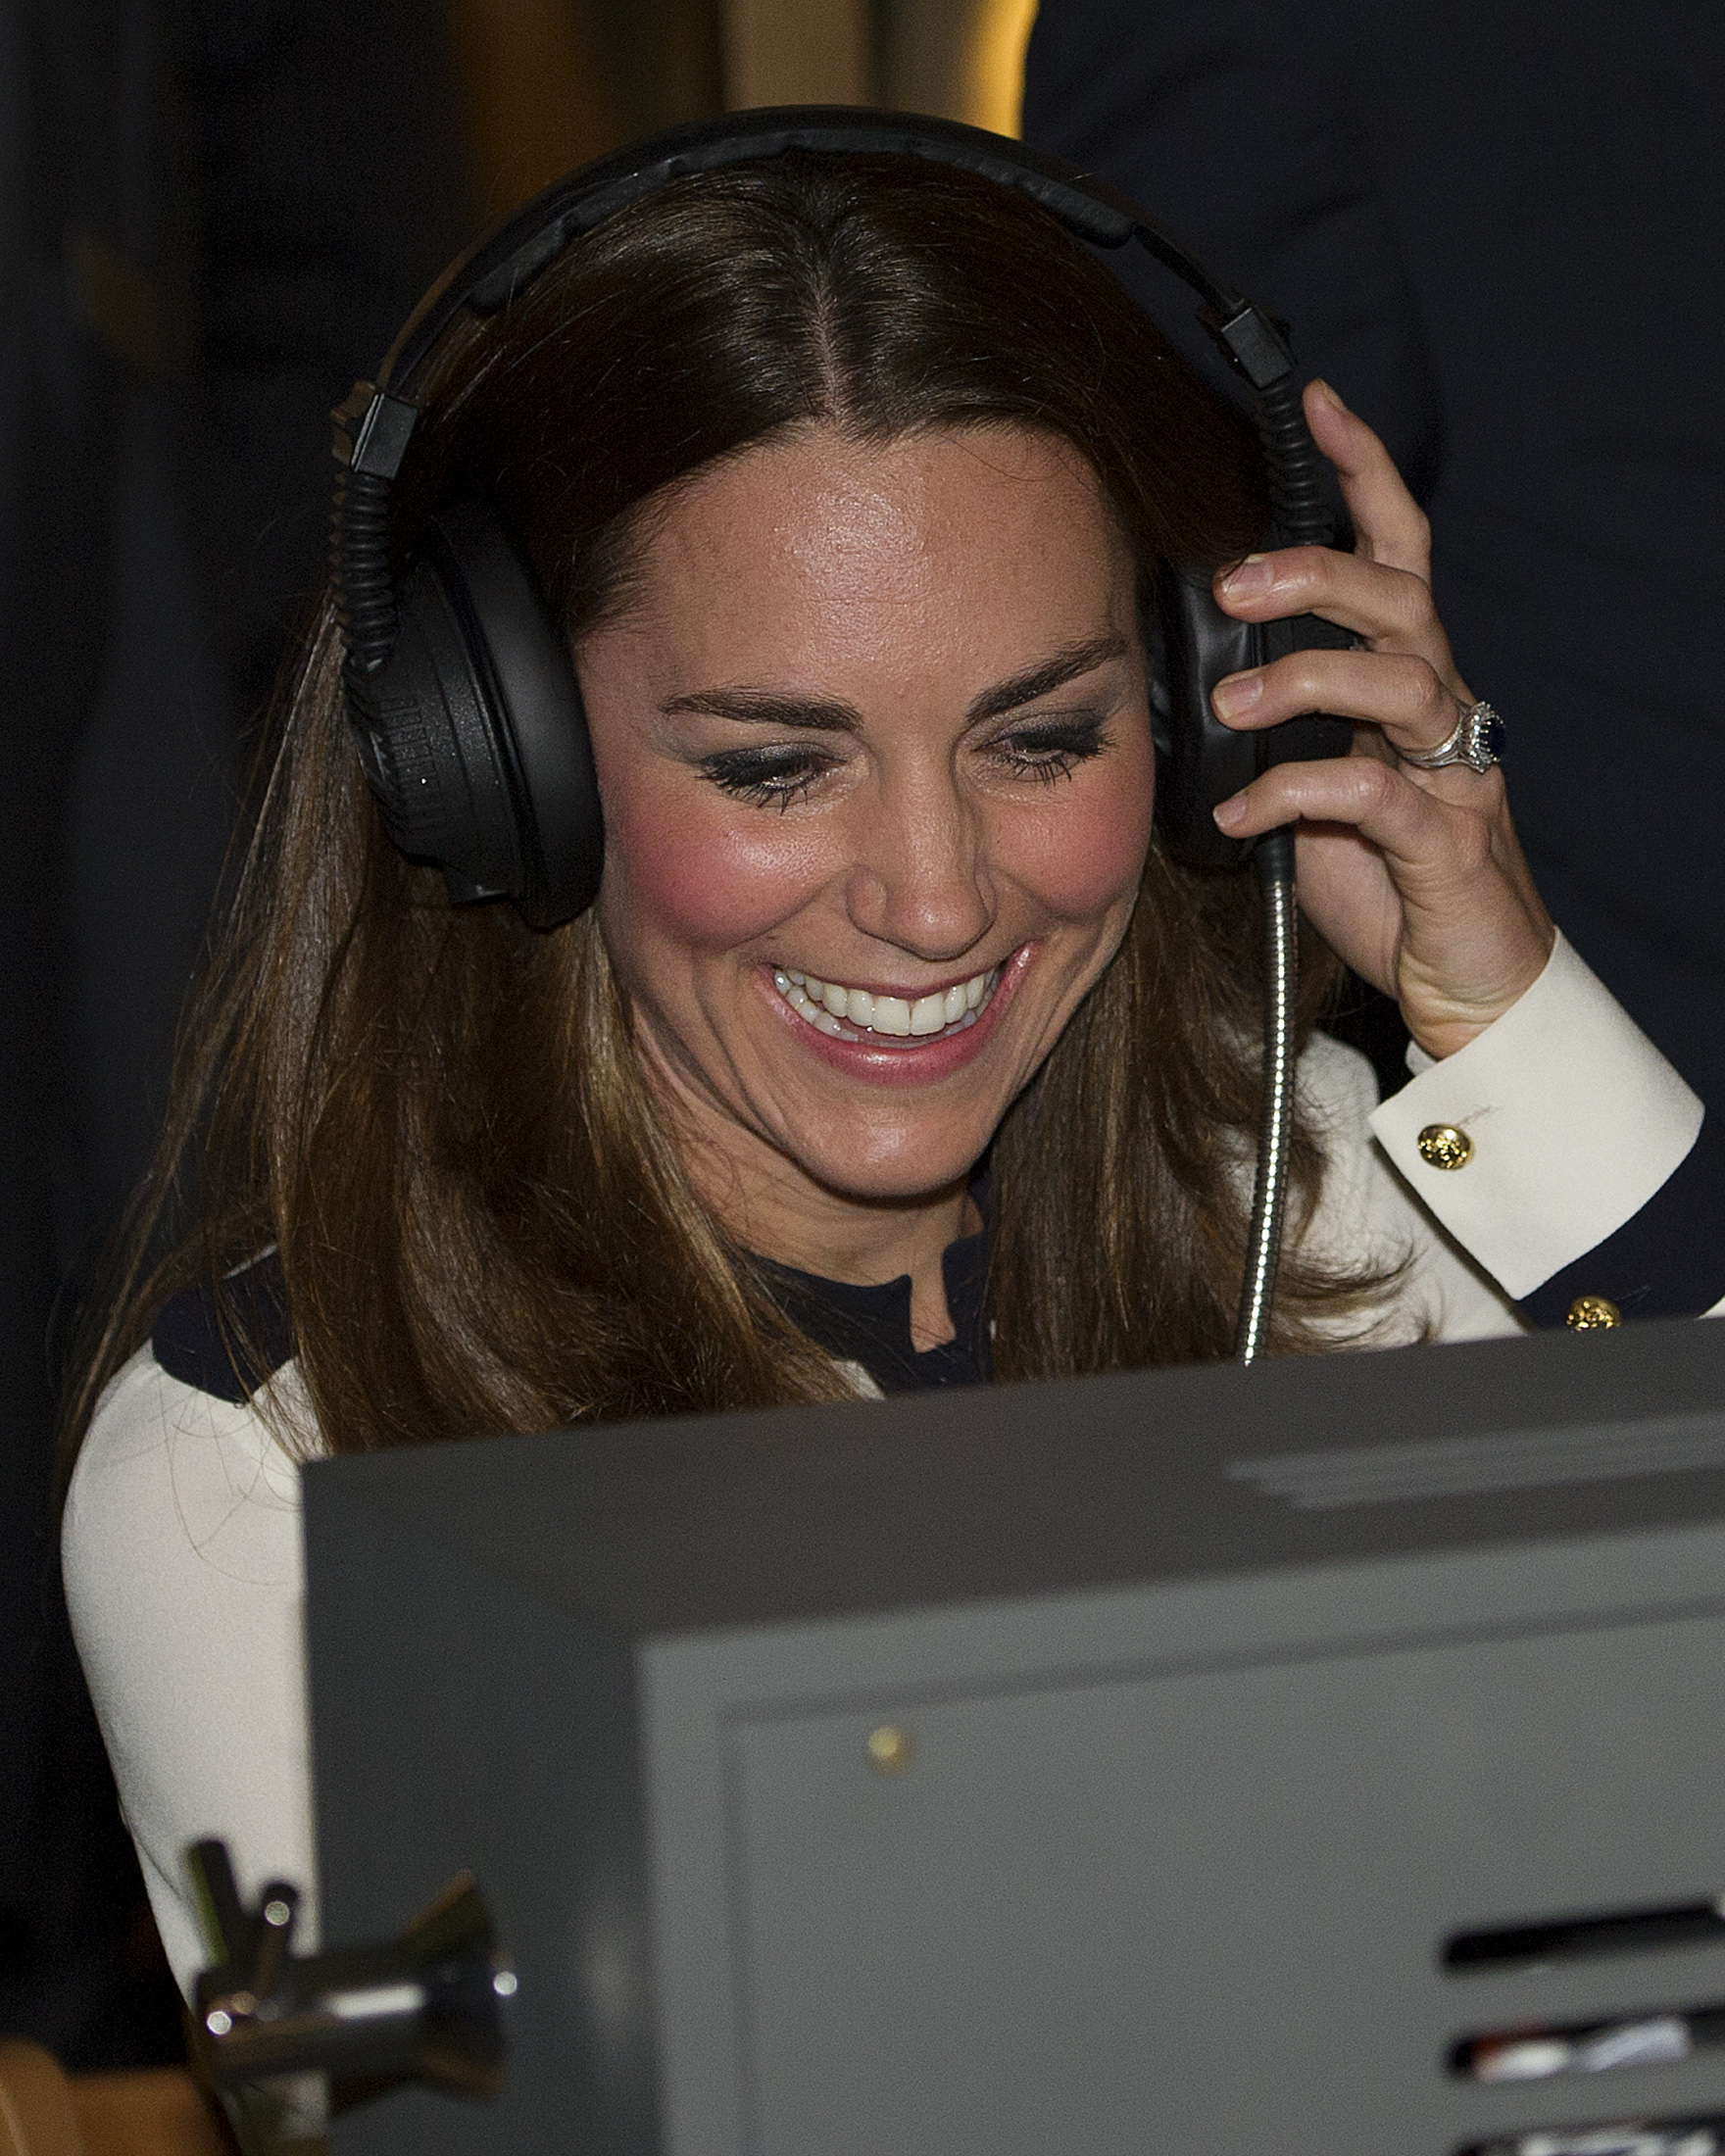 Well Replayed, Kate Middleton: The Bletchley Park Visit